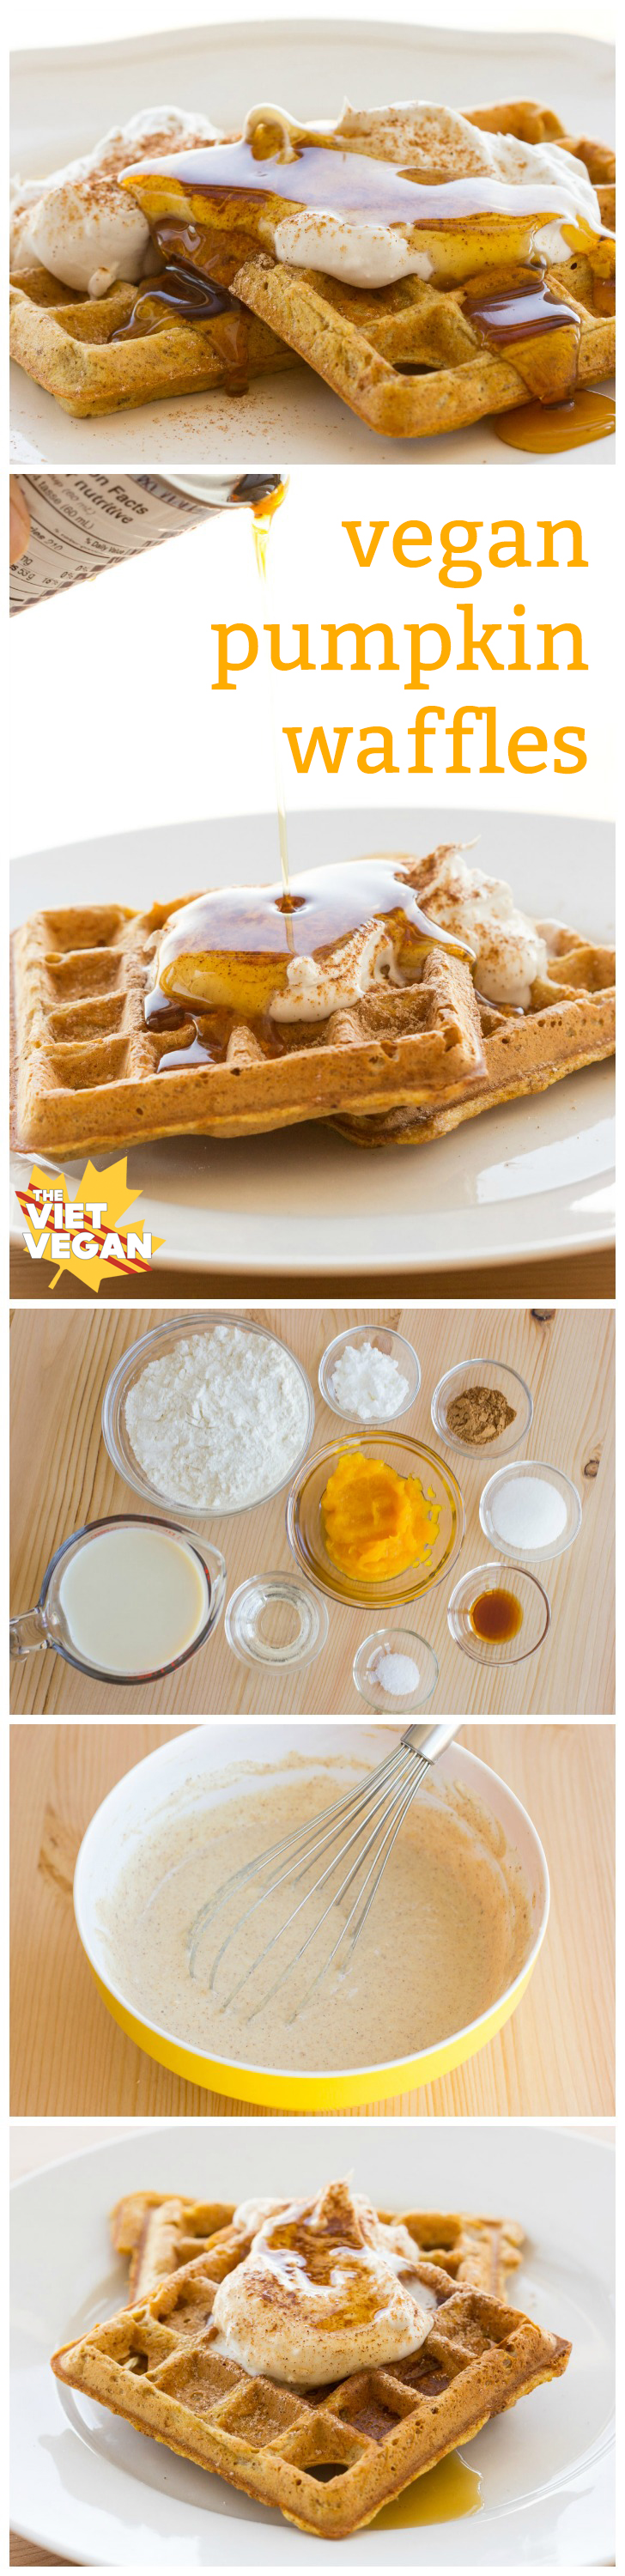 Vegan Pumpkin Waffles | The Viet Vegan | Crisp on the outside, fluffy on the inside, perfect for coconut whipped cream and maple syrup.